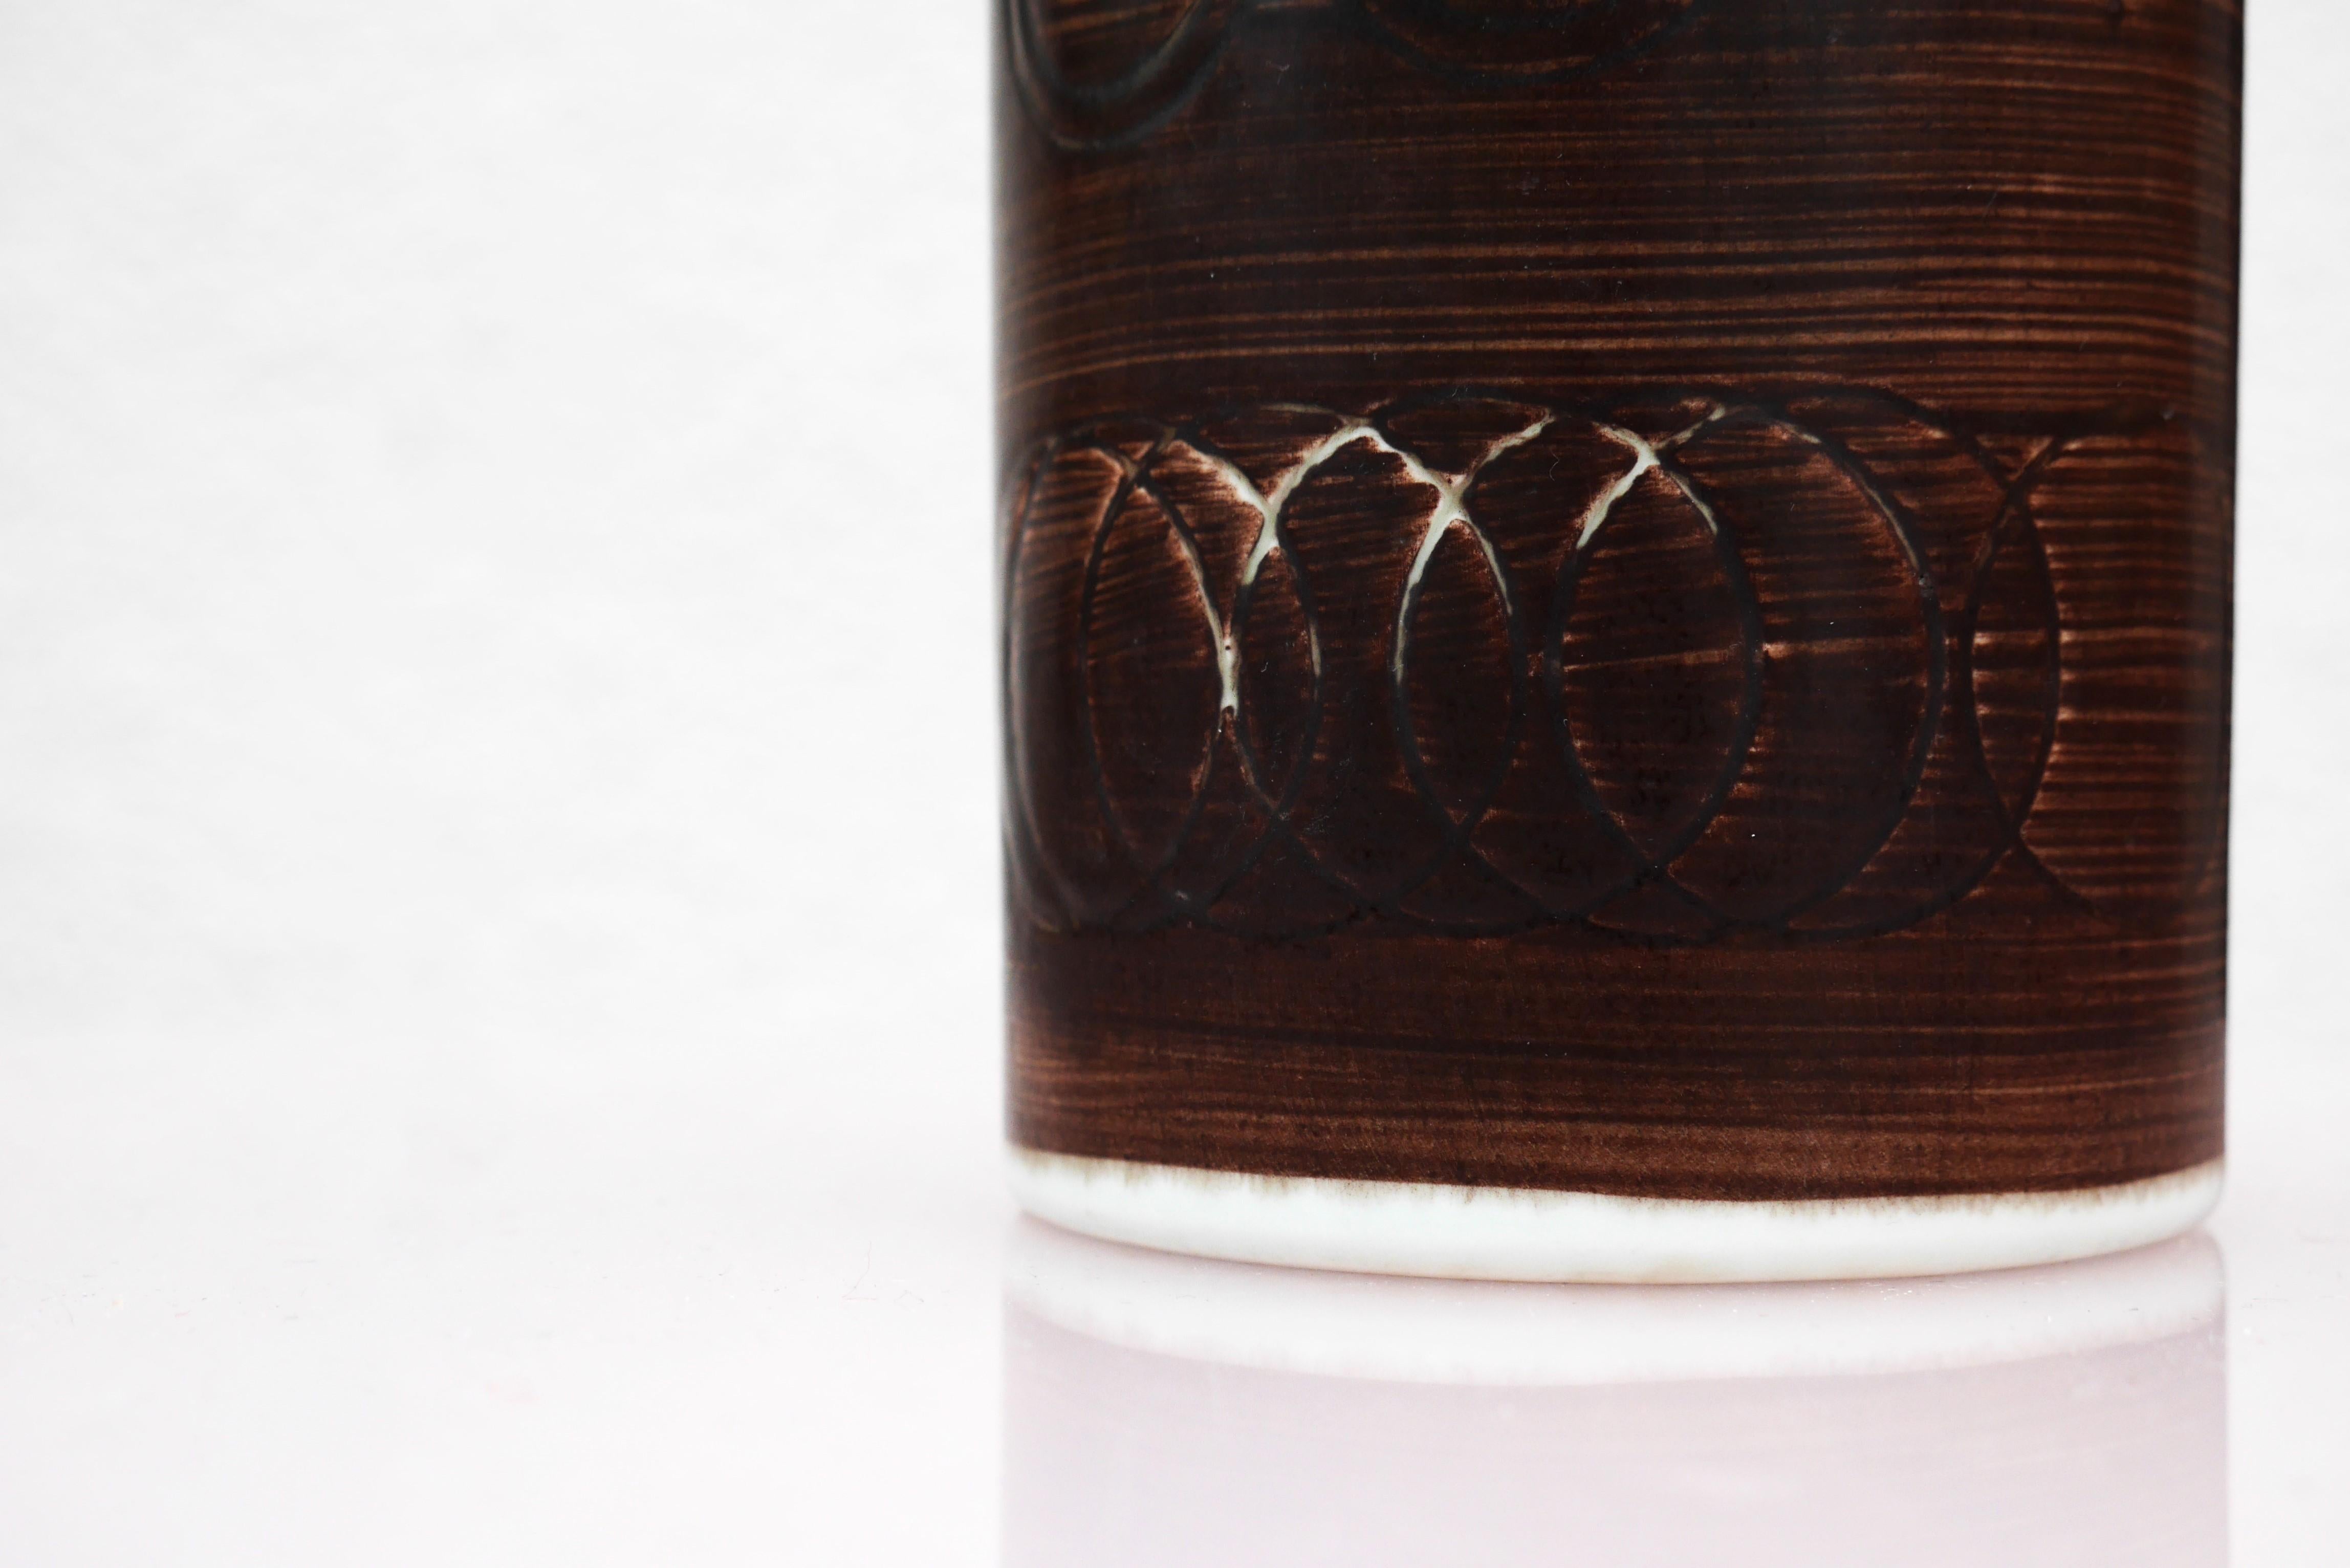 Mid-20th Century Vase by Olle Alberius from the 'Sarek' Series for Rörstrand, Sweden. For Sale